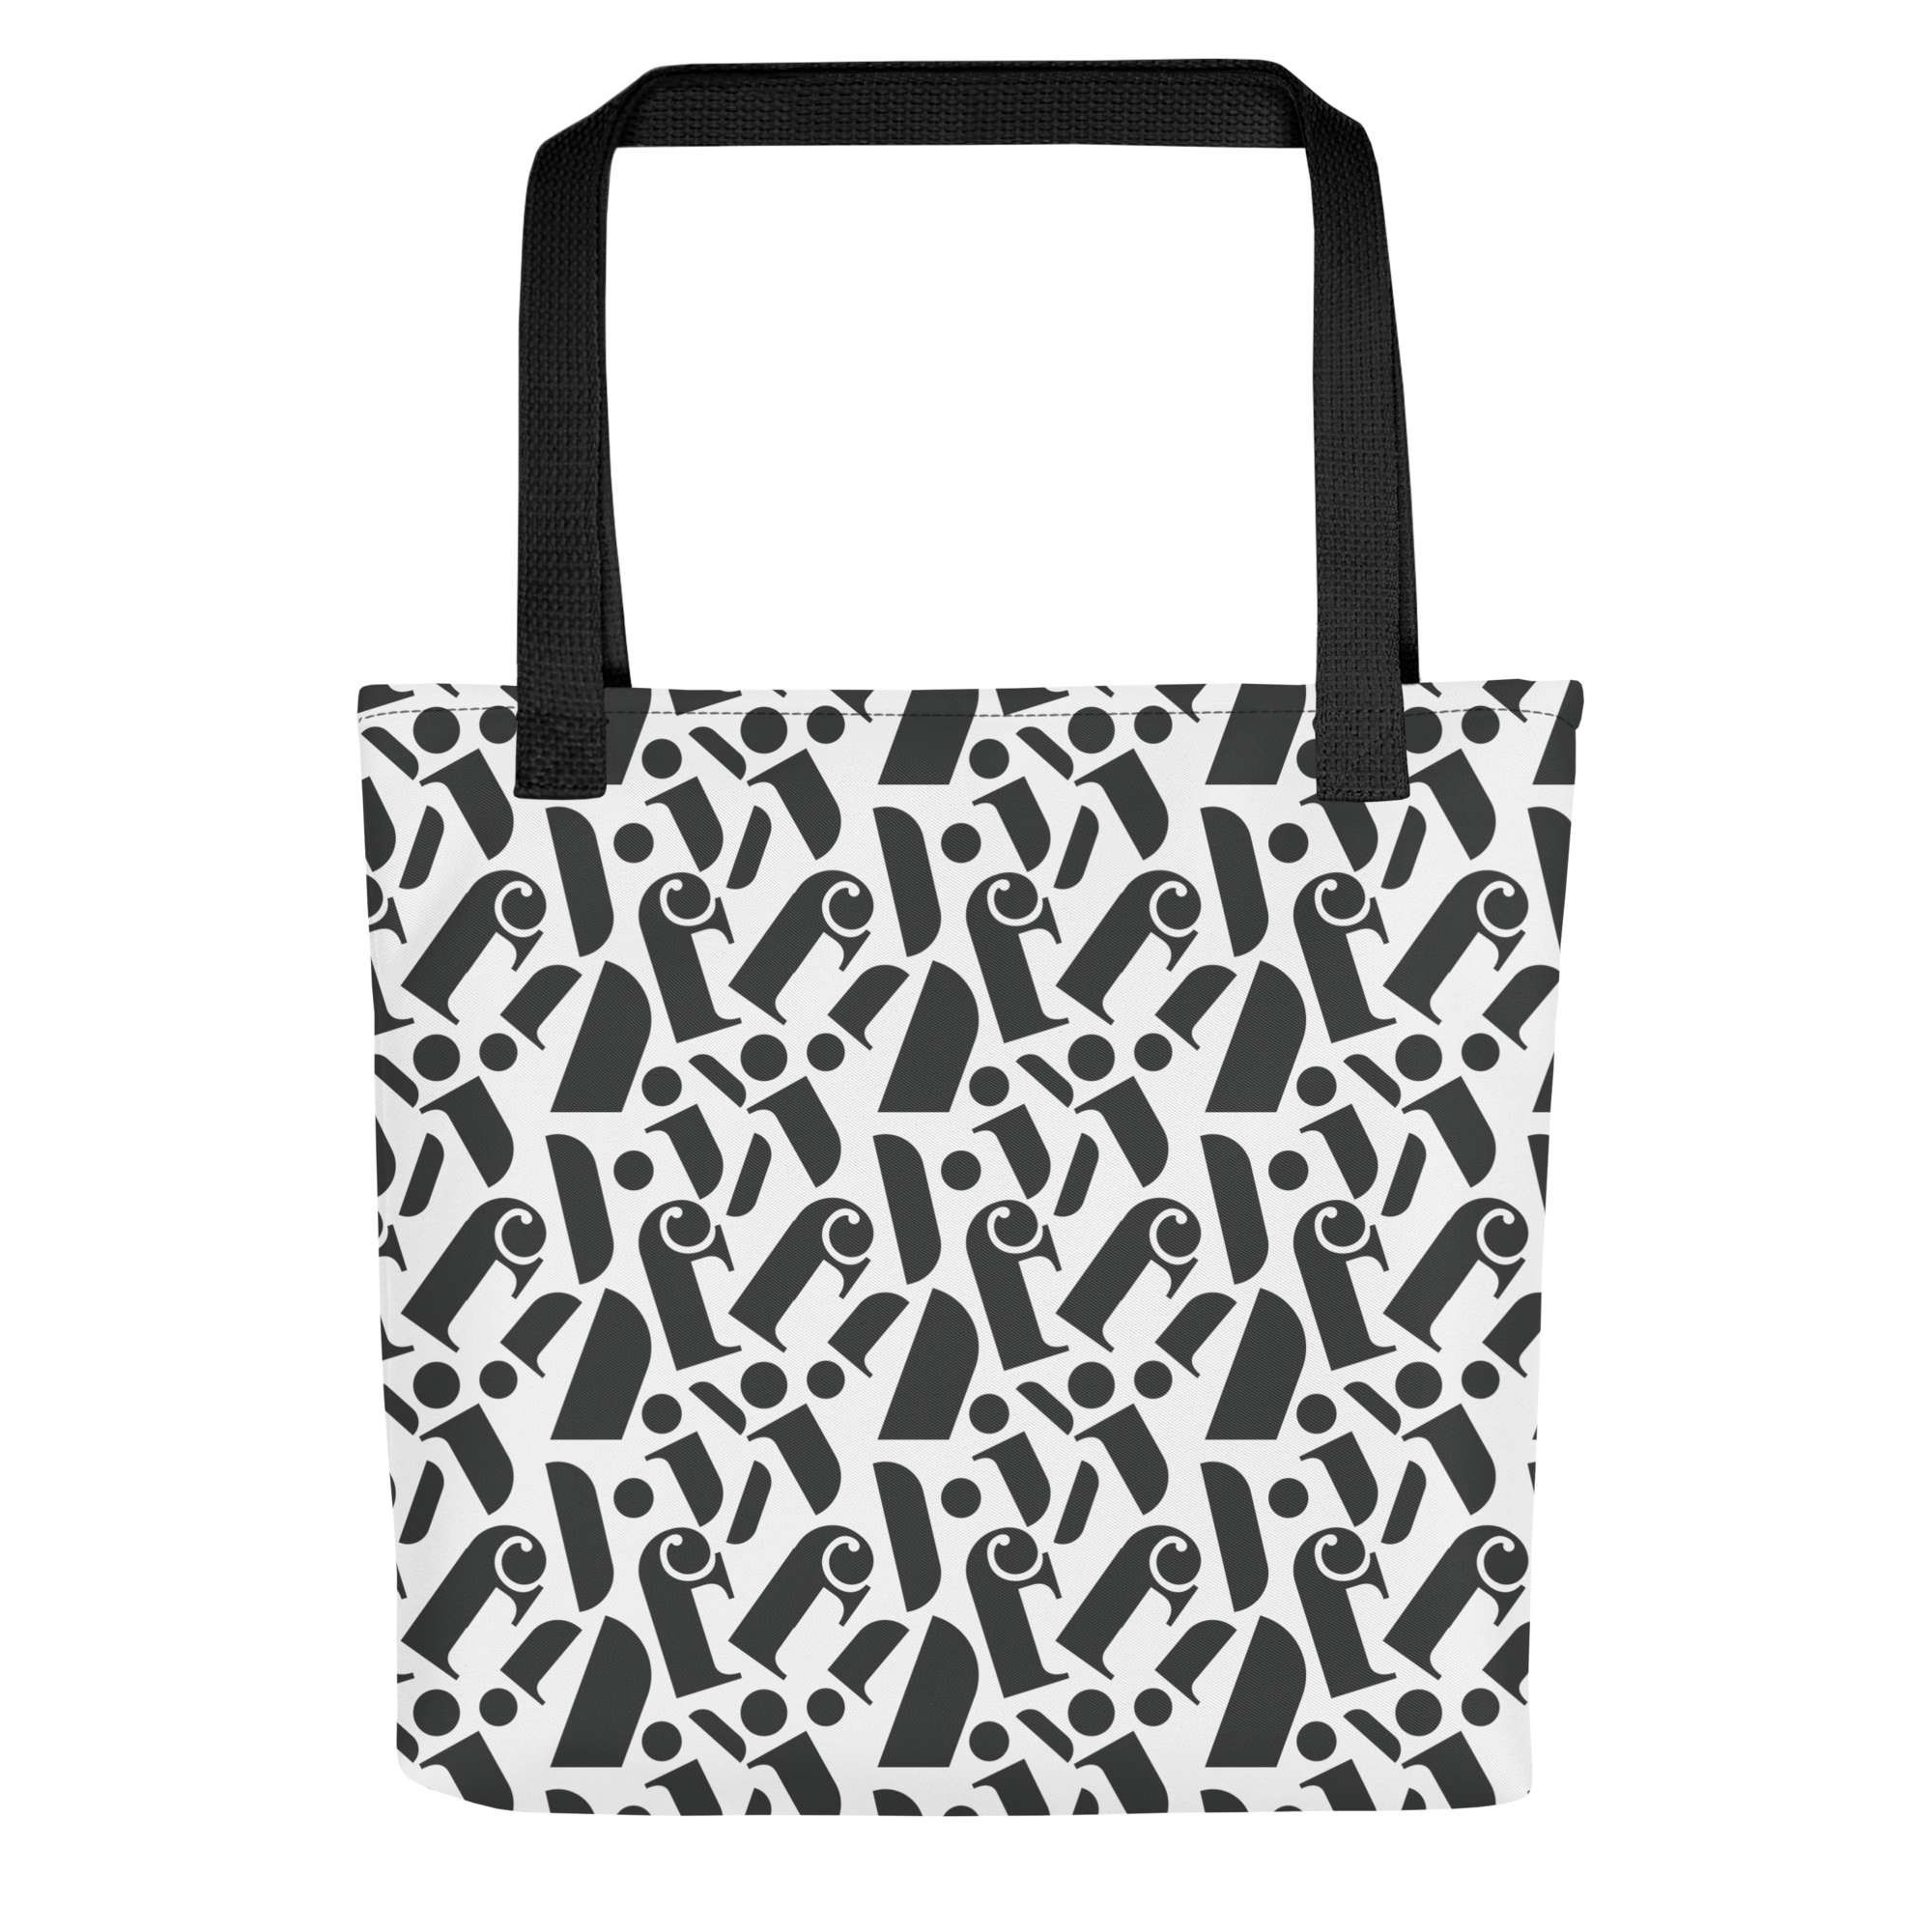 all-over-print-tote-black-15x15-mockup-662a4ce6ee929.png